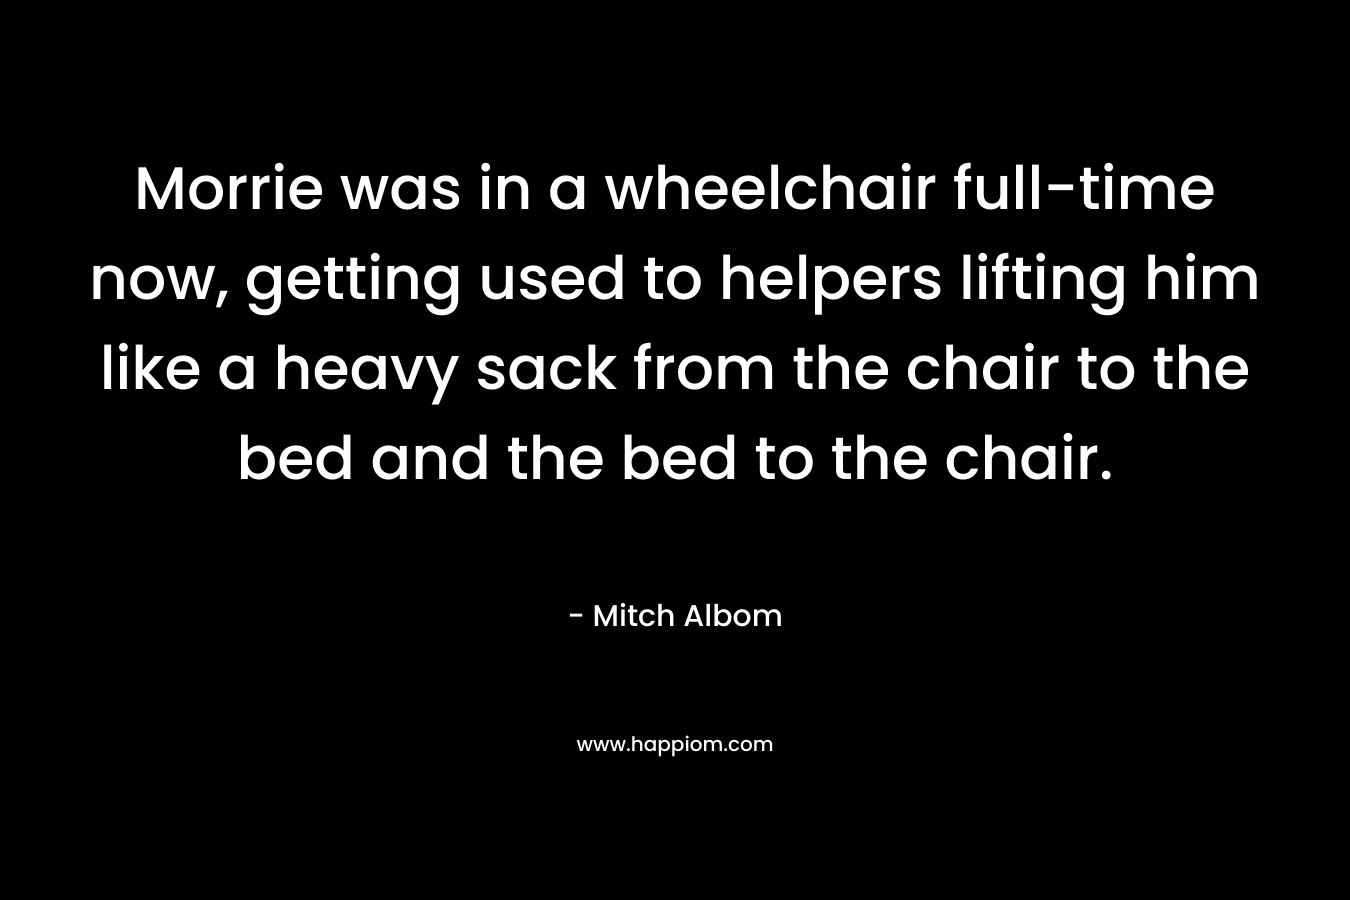 Morrie was in a wheelchair full-time now, getting used to helpers lifting him like a heavy sack from the chair to the bed and the bed to the chair. – Mitch Albom